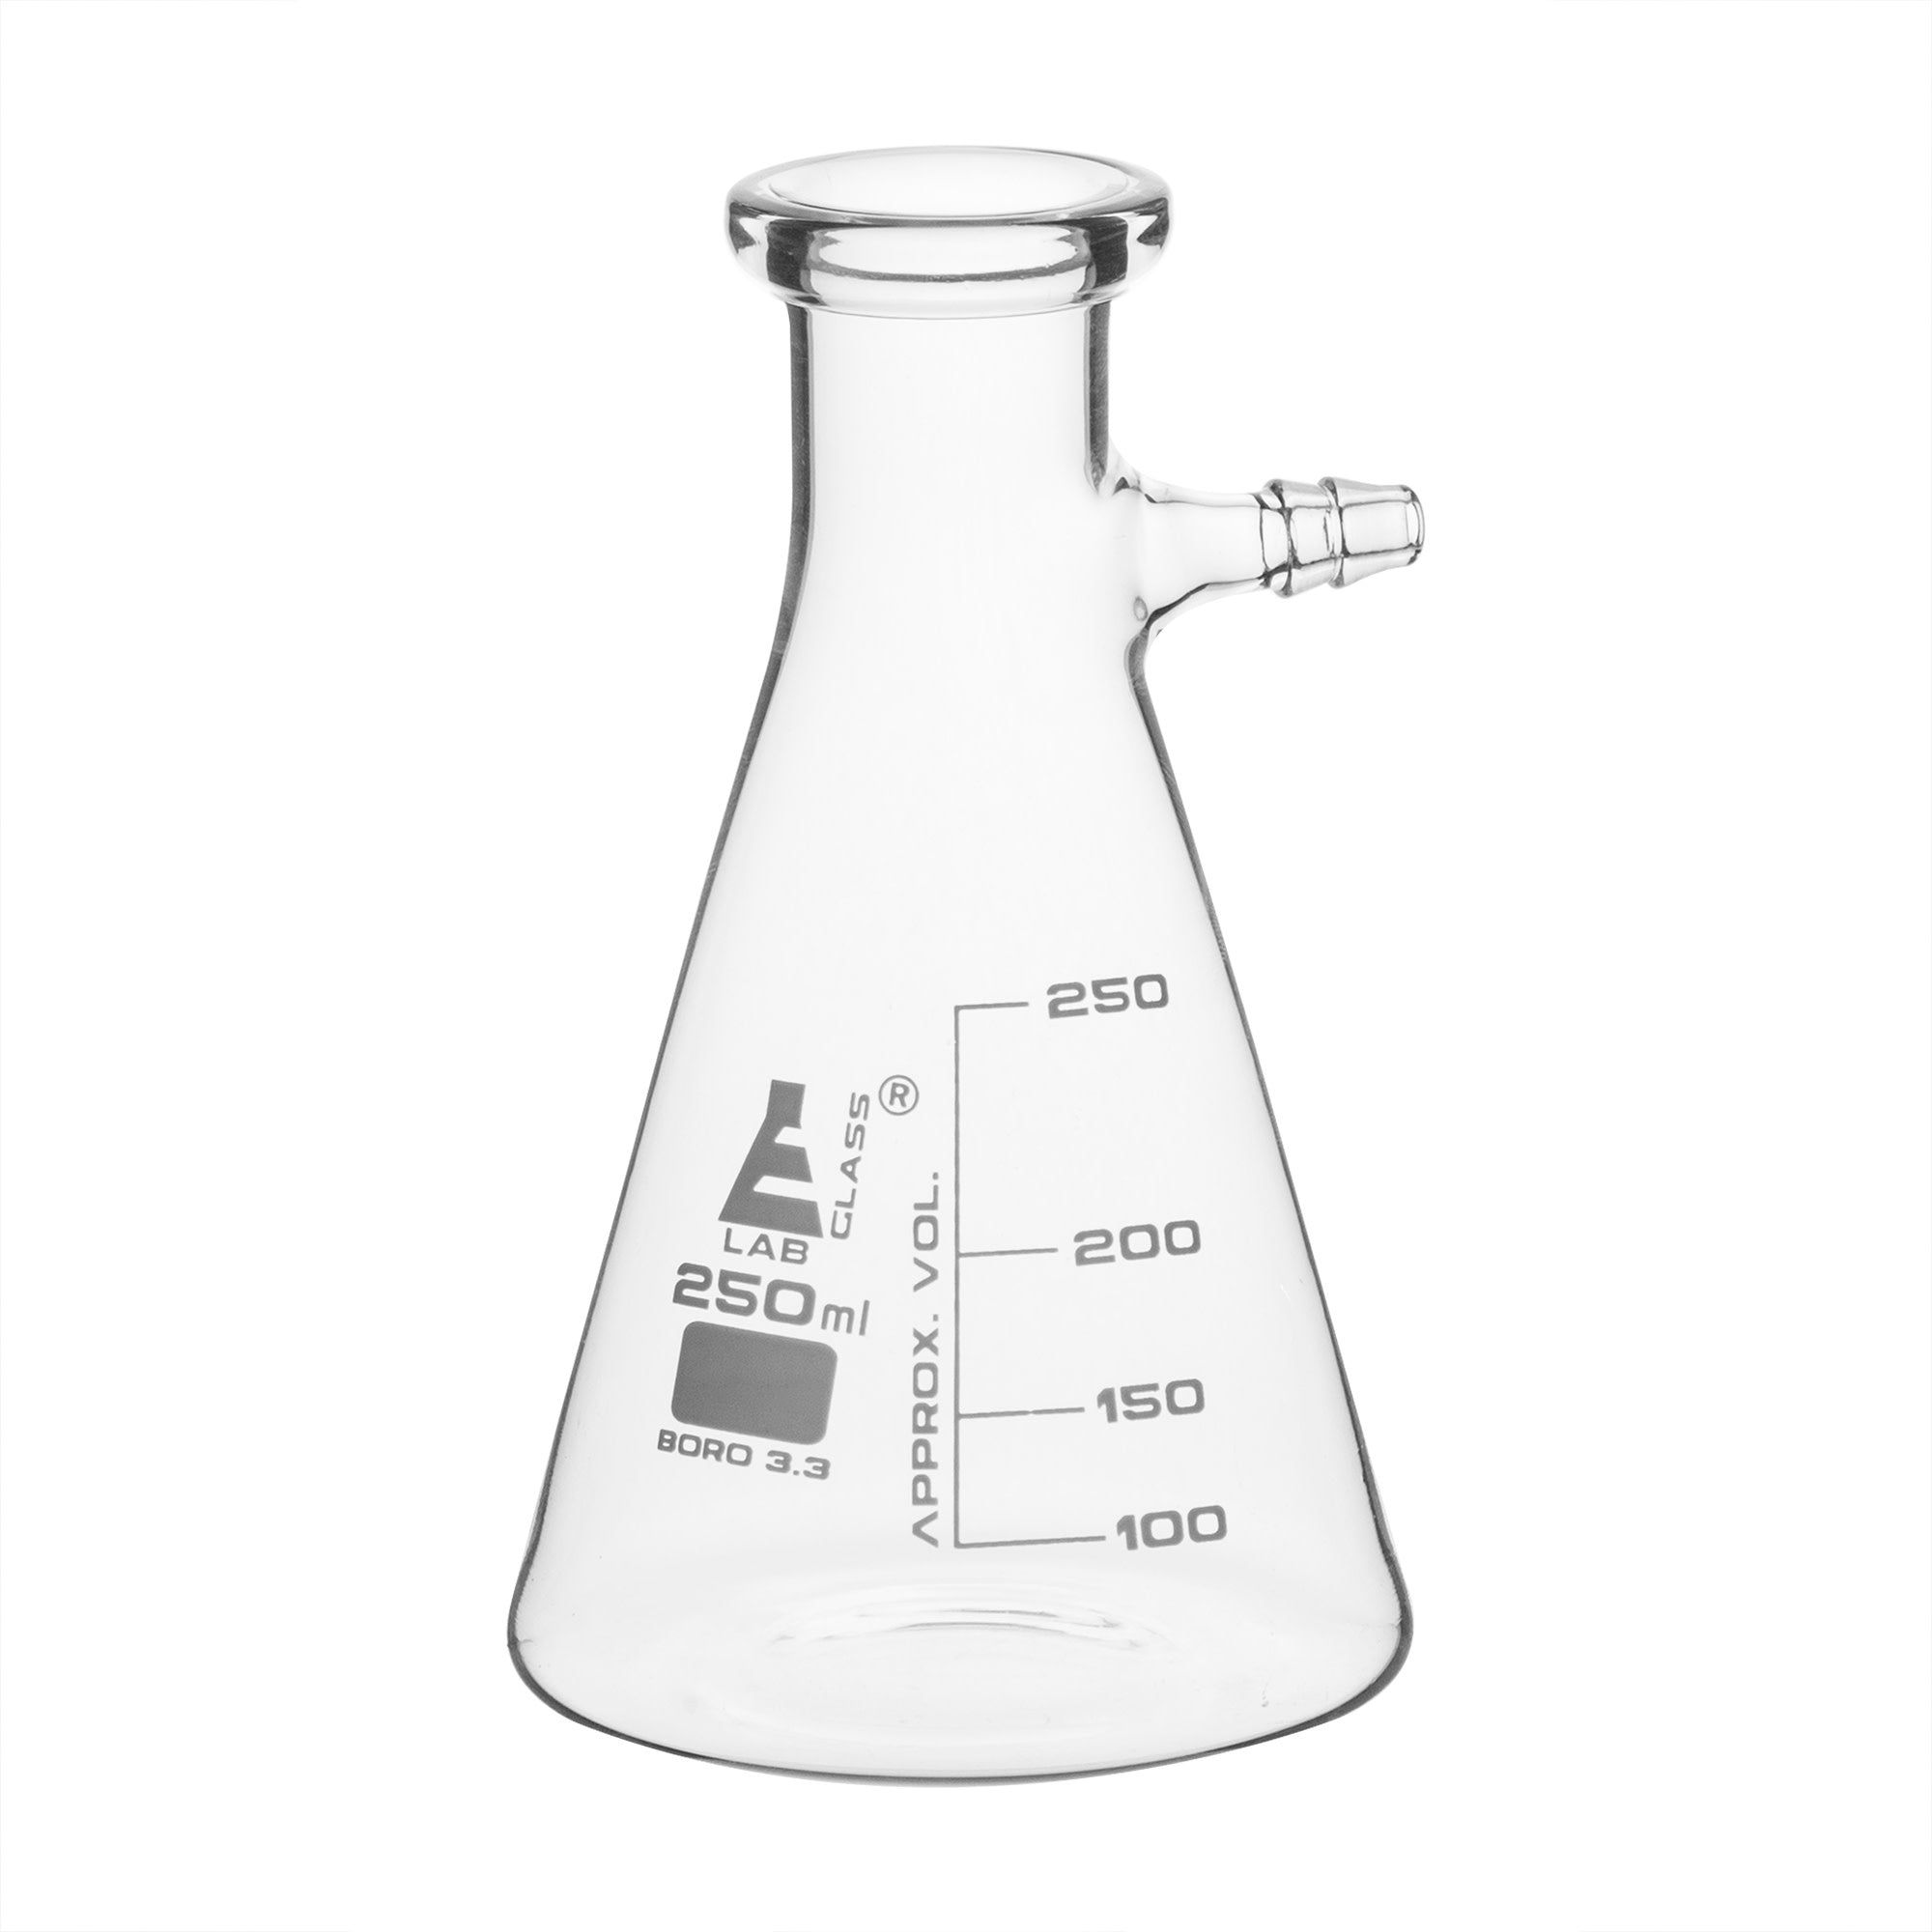 Borosilicate Glass Filtering Flask With Glass Connector, 250ml, Graduated, Autoclavable